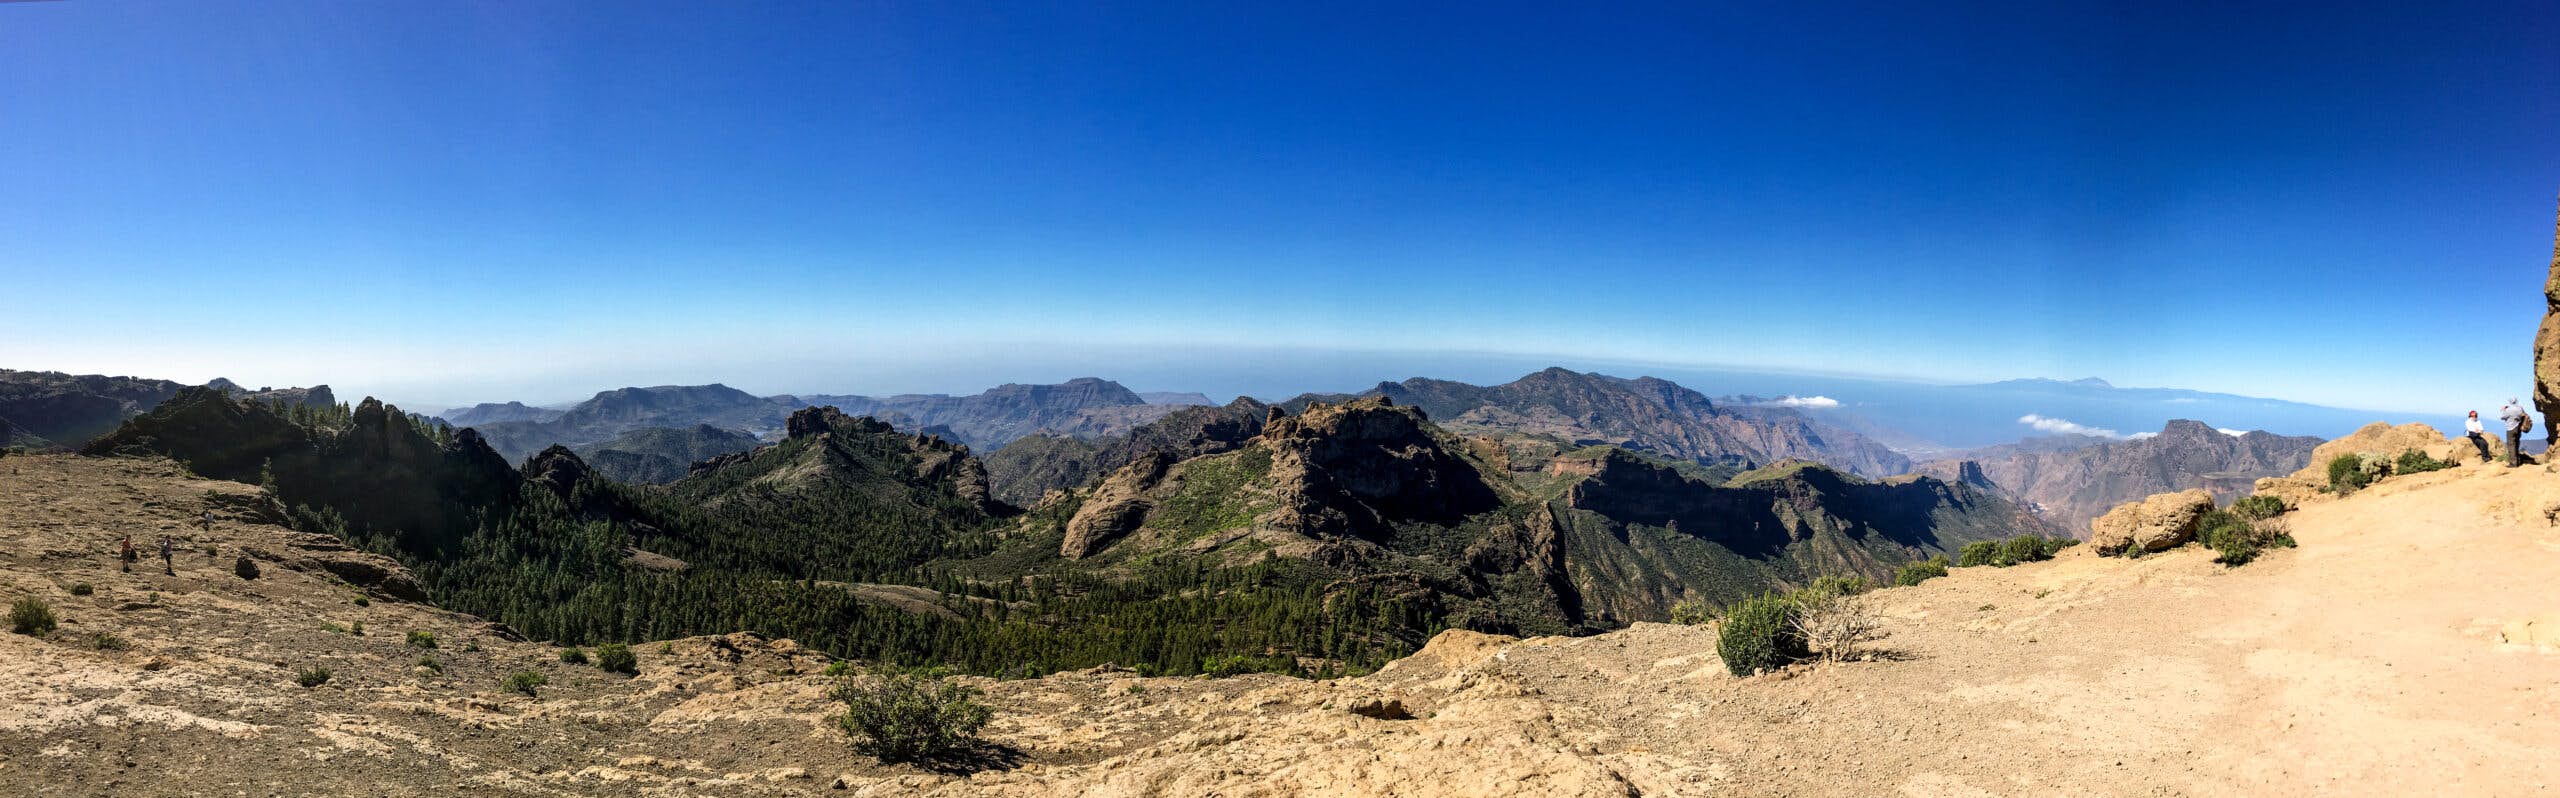 Panorama from the Roque Nublo plateau to the surrounding heights with Tenerife in the background